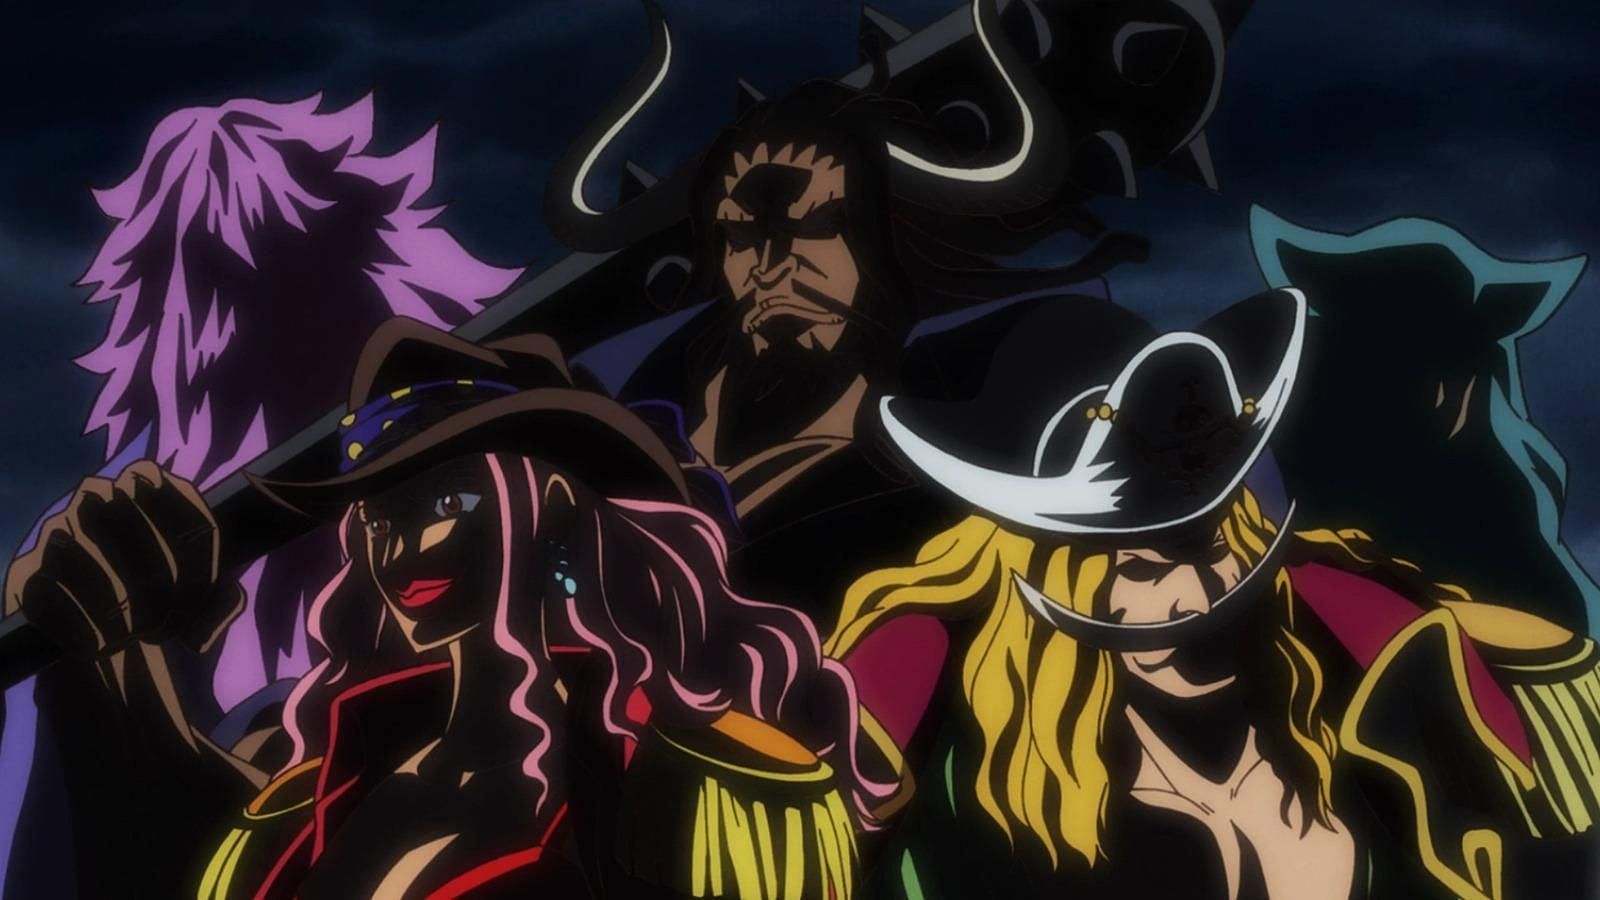 Rocks Pirates as seen in One Piece (Image via Toei Animation)